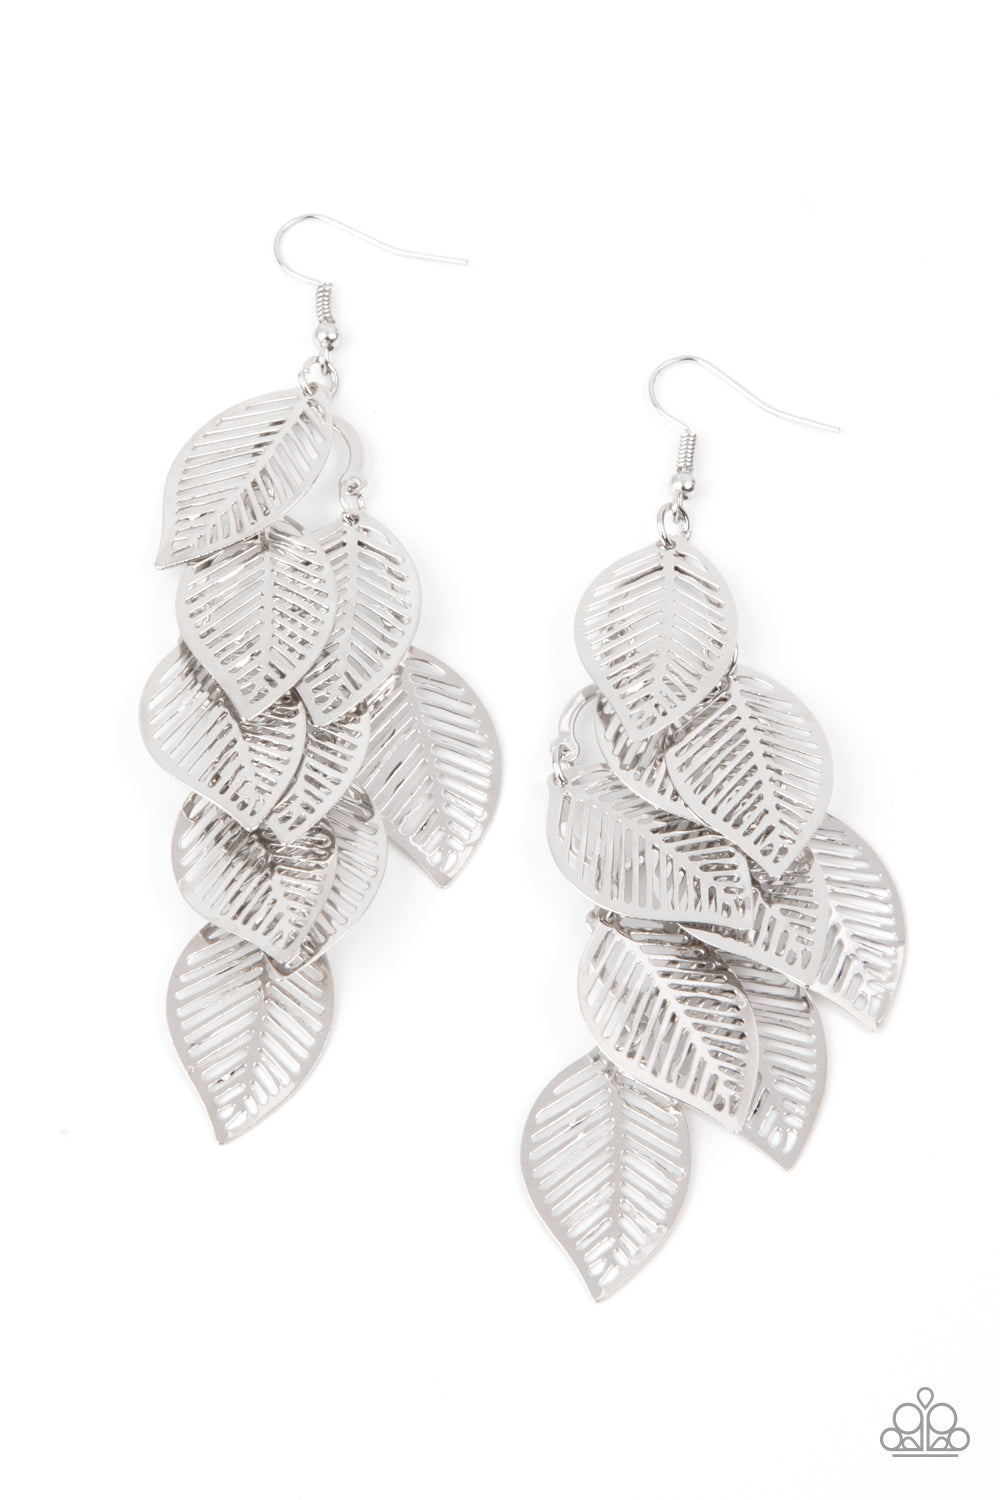 Paparazzi Limitlessly Leafy - Silver Earrings - A Finishing Touch Jewelry